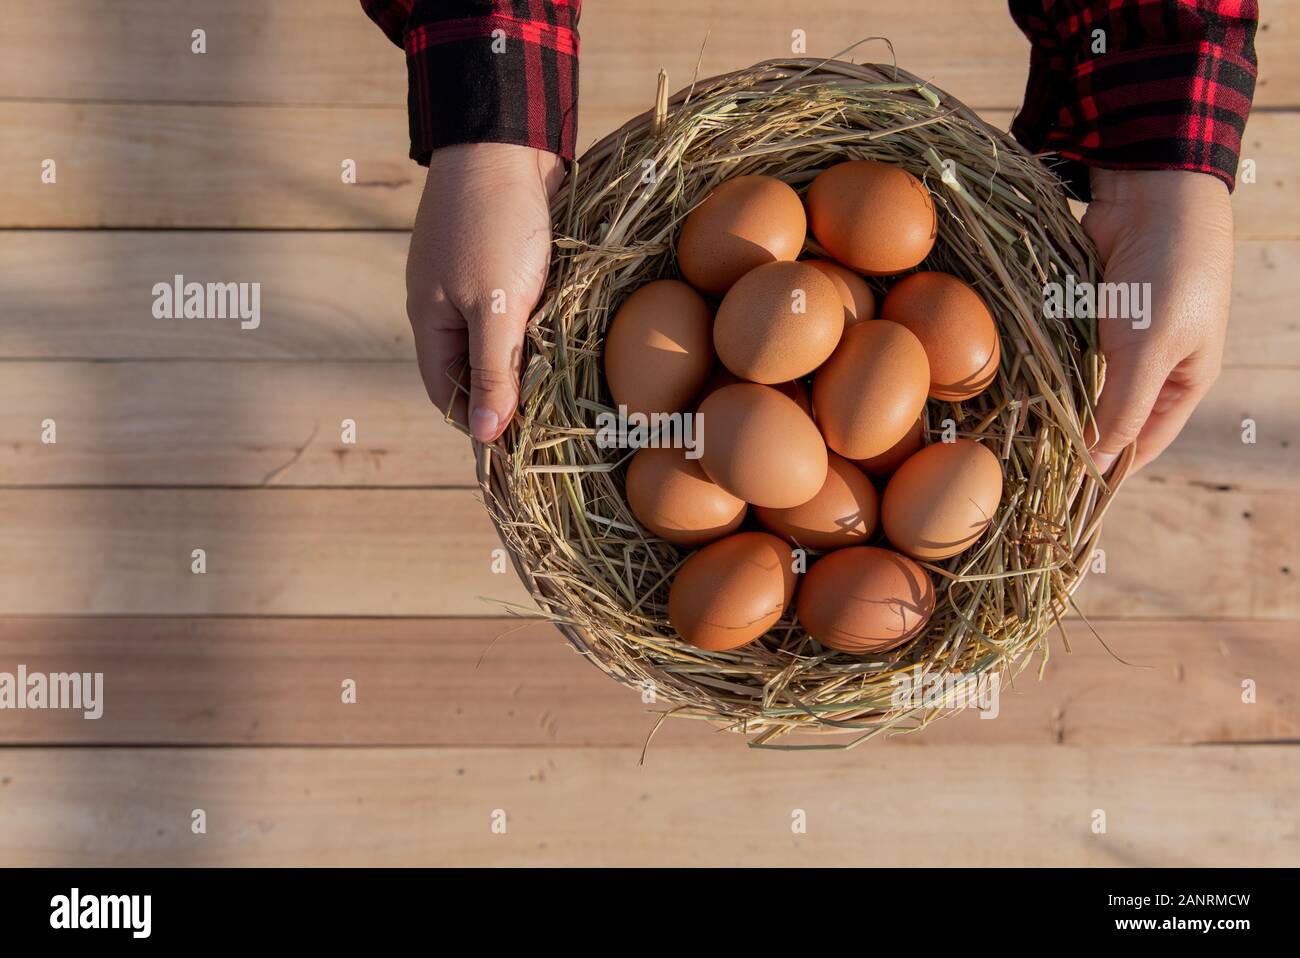 Women wear red striped shirts, put fresh eggs in a rattan baskets placed on wooden floor. Stock Photo